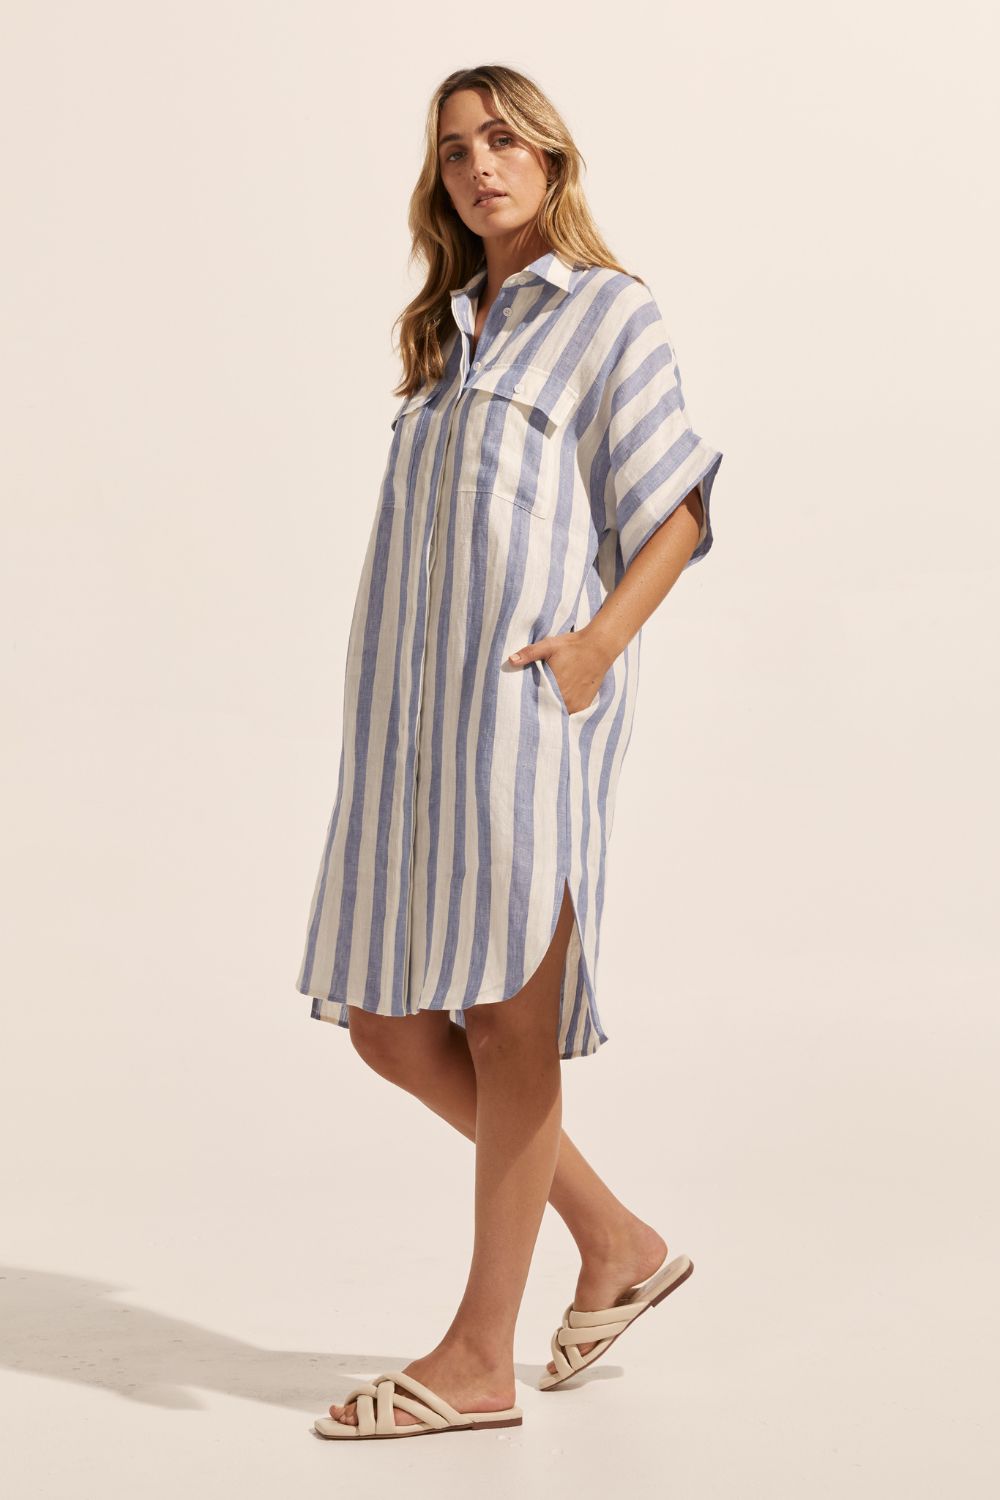 blue and white stripe, dress, mid length sleeves, oversized pockets, button down, collared dress, side image